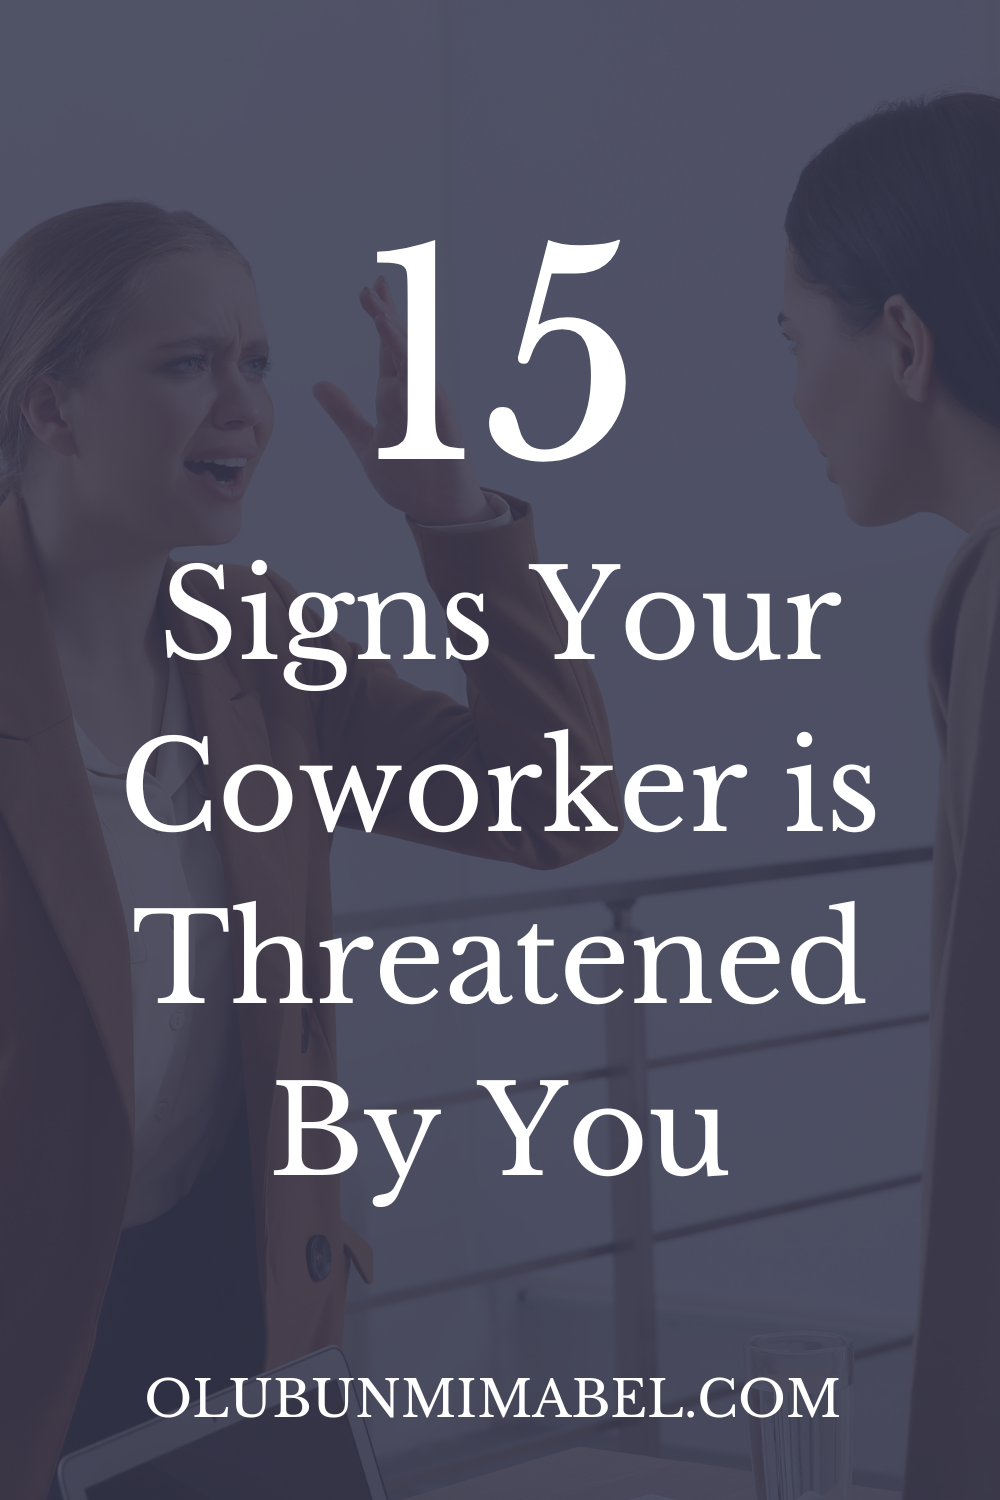  Signs Your Coworker is Threatened by You